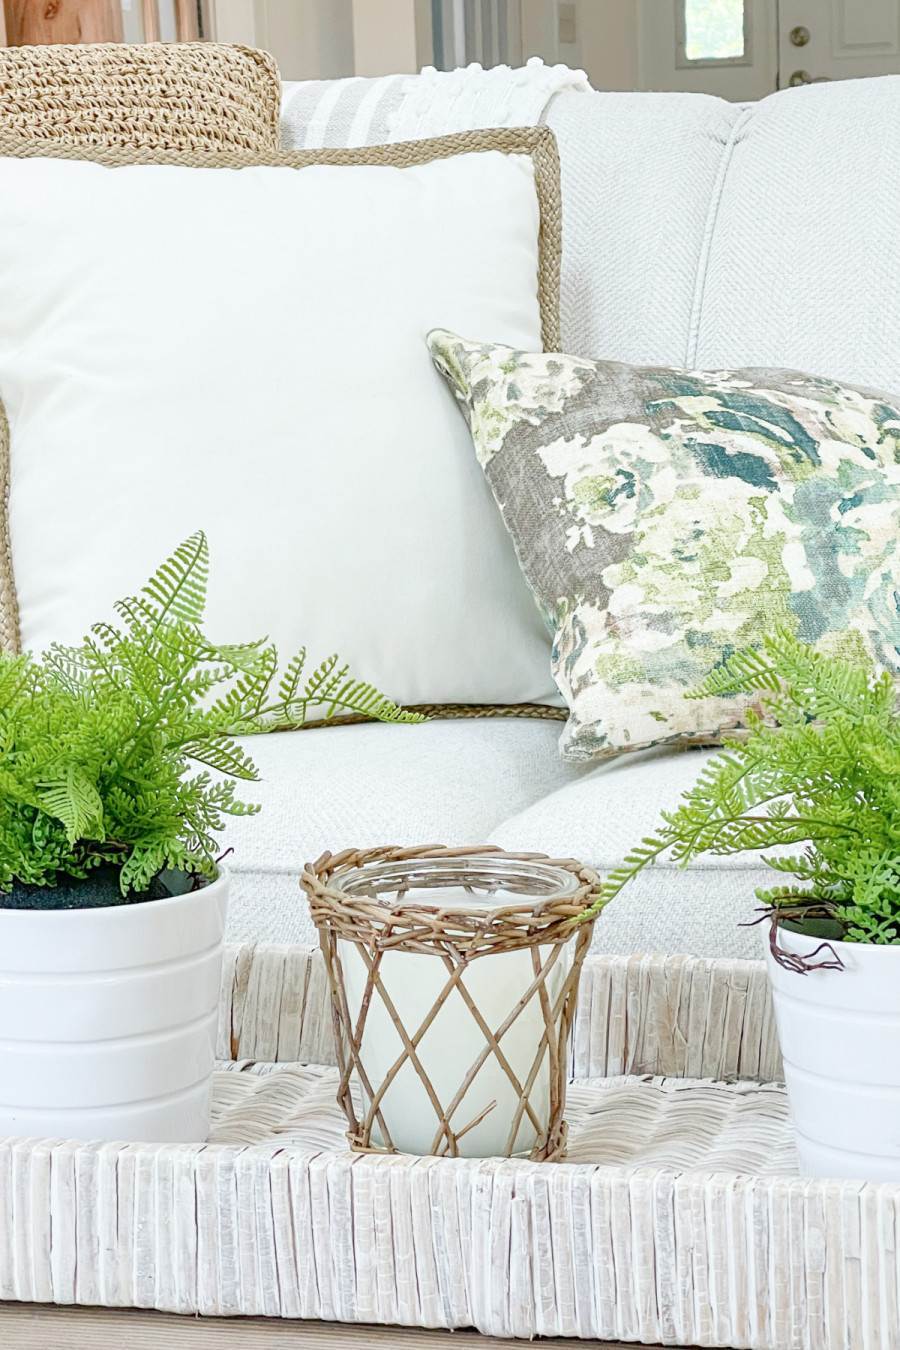 AN EASY AND CASUAL PILLOW ARRANGEMENT TO TRY